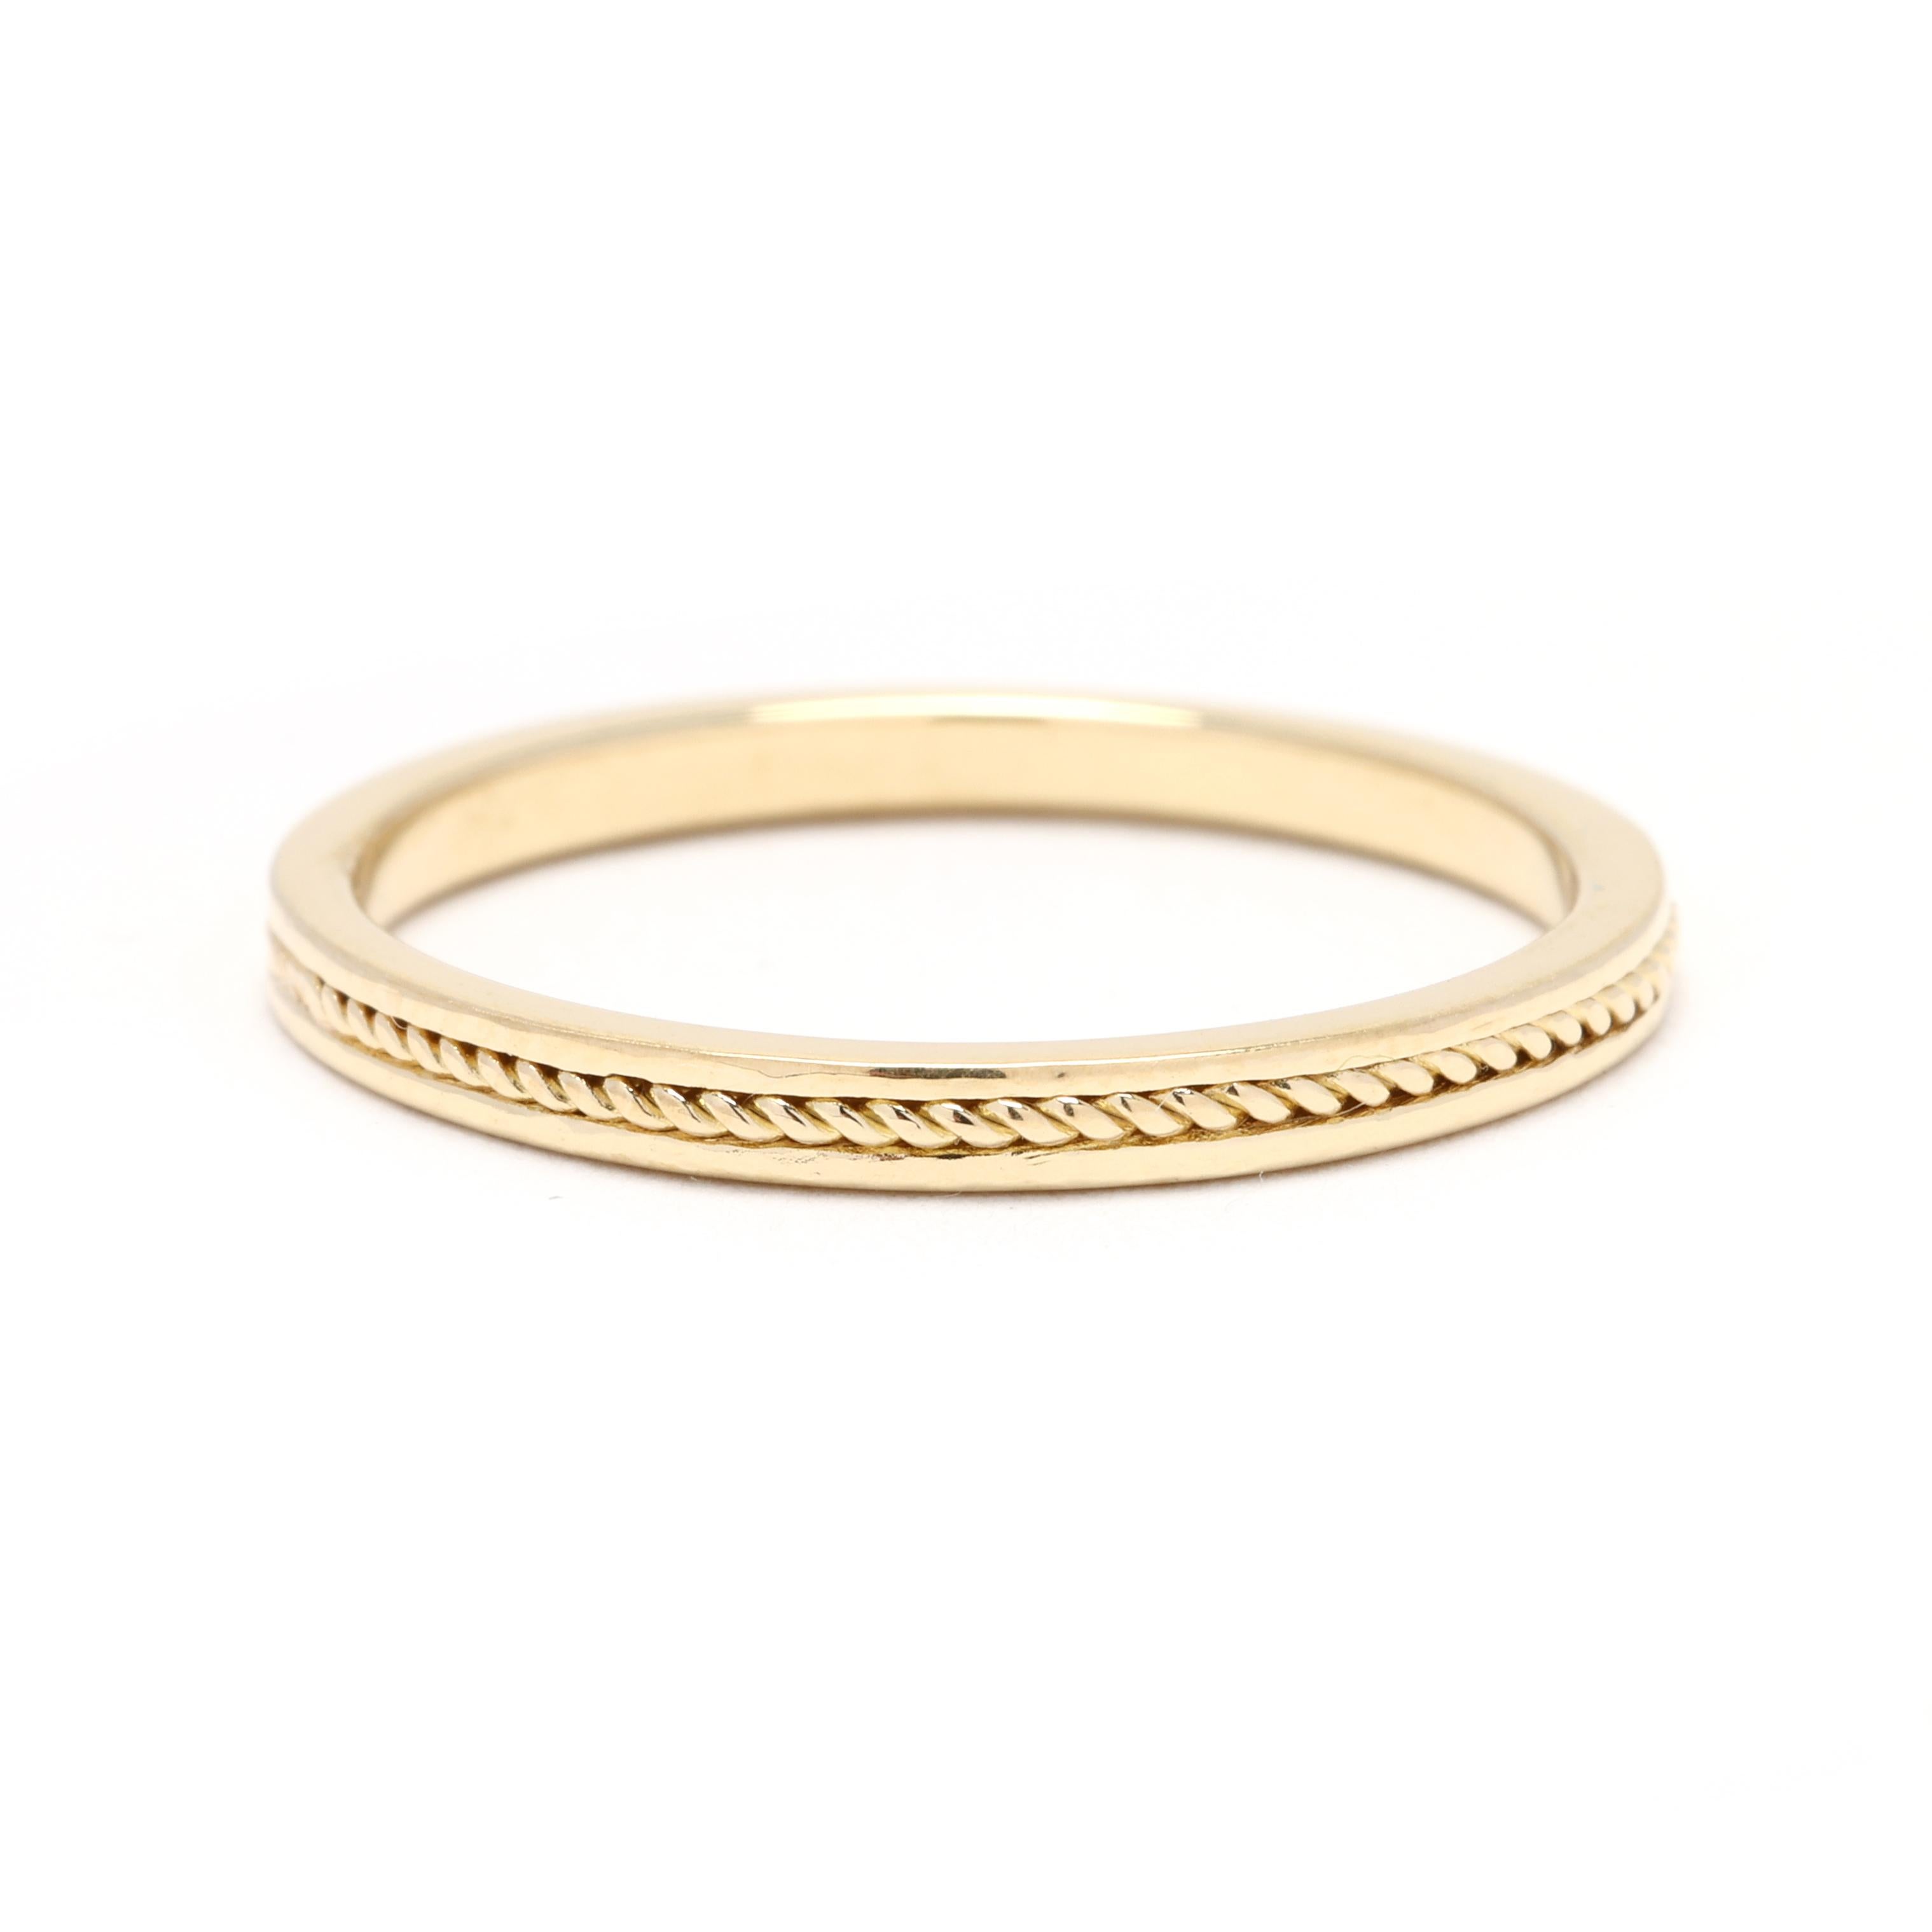 This minimalist 14k white gold rope band ring is the perfect accessory for adding a touch of elegance to any outfit. Made with solid 14k white gold, this ring is both durable and high-quality. The rope band design adds a modern and sleek touch,